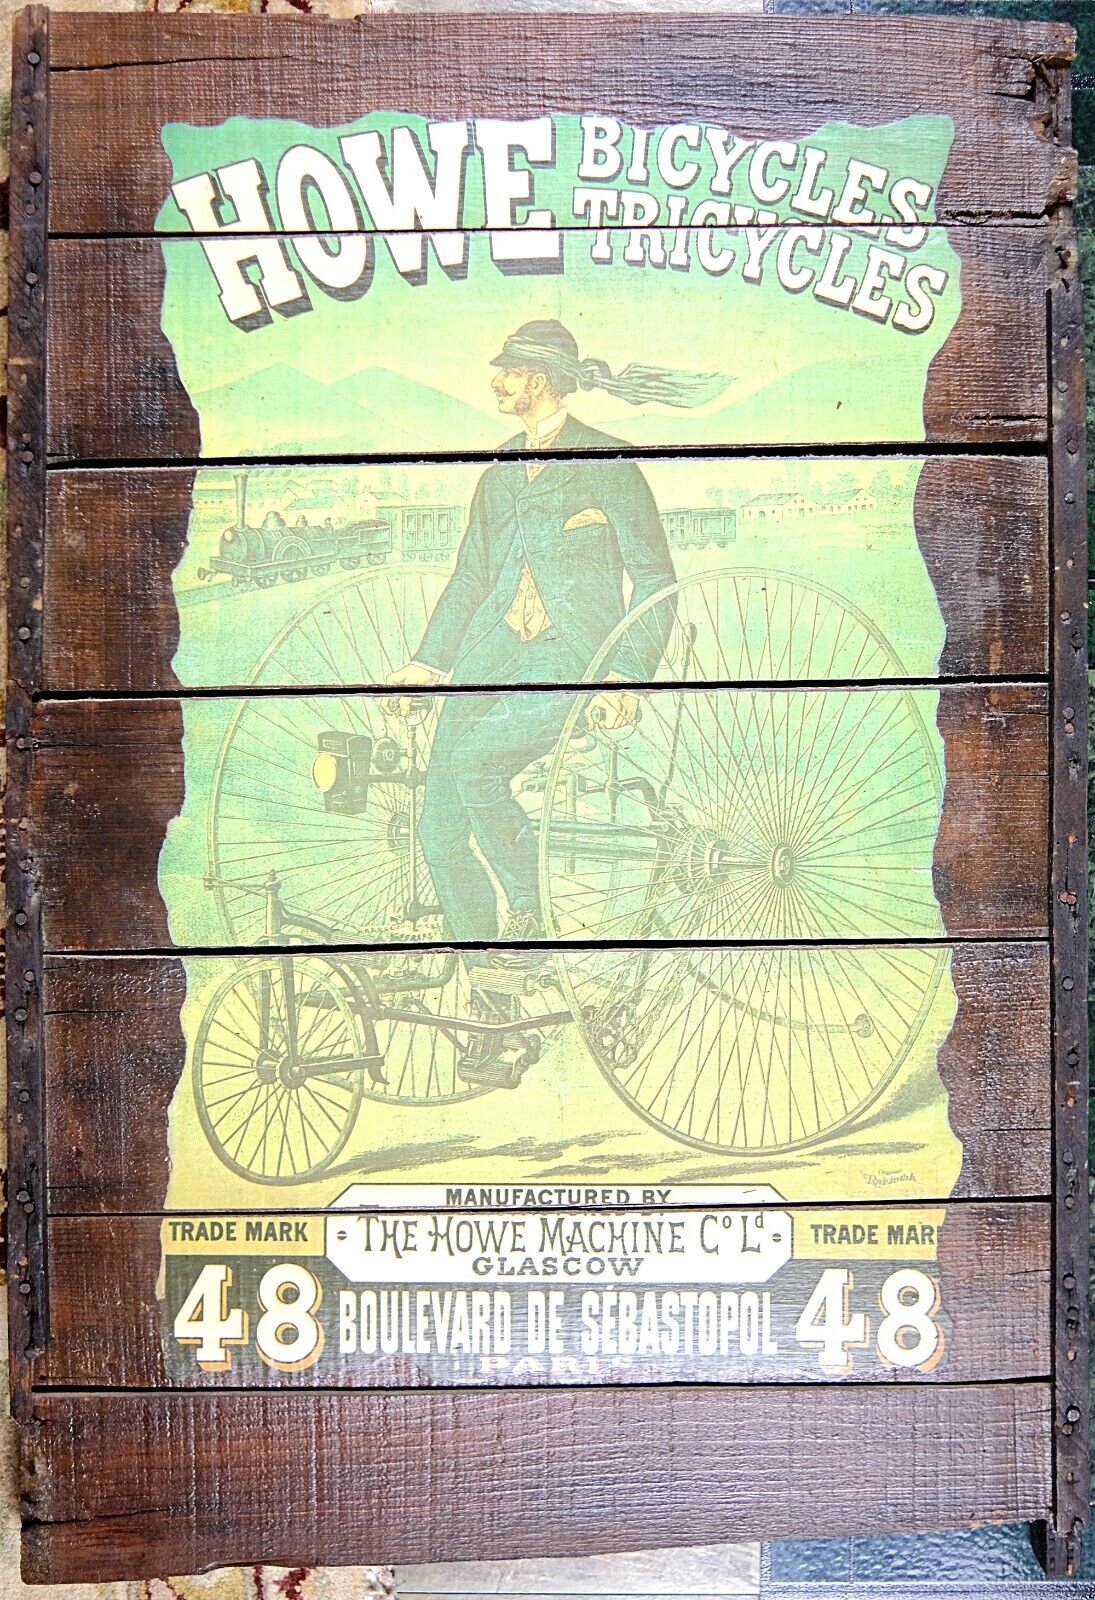 Howe Bicycles Tricycles Antique 1885 Advertising Poster on Antique Wood Panel